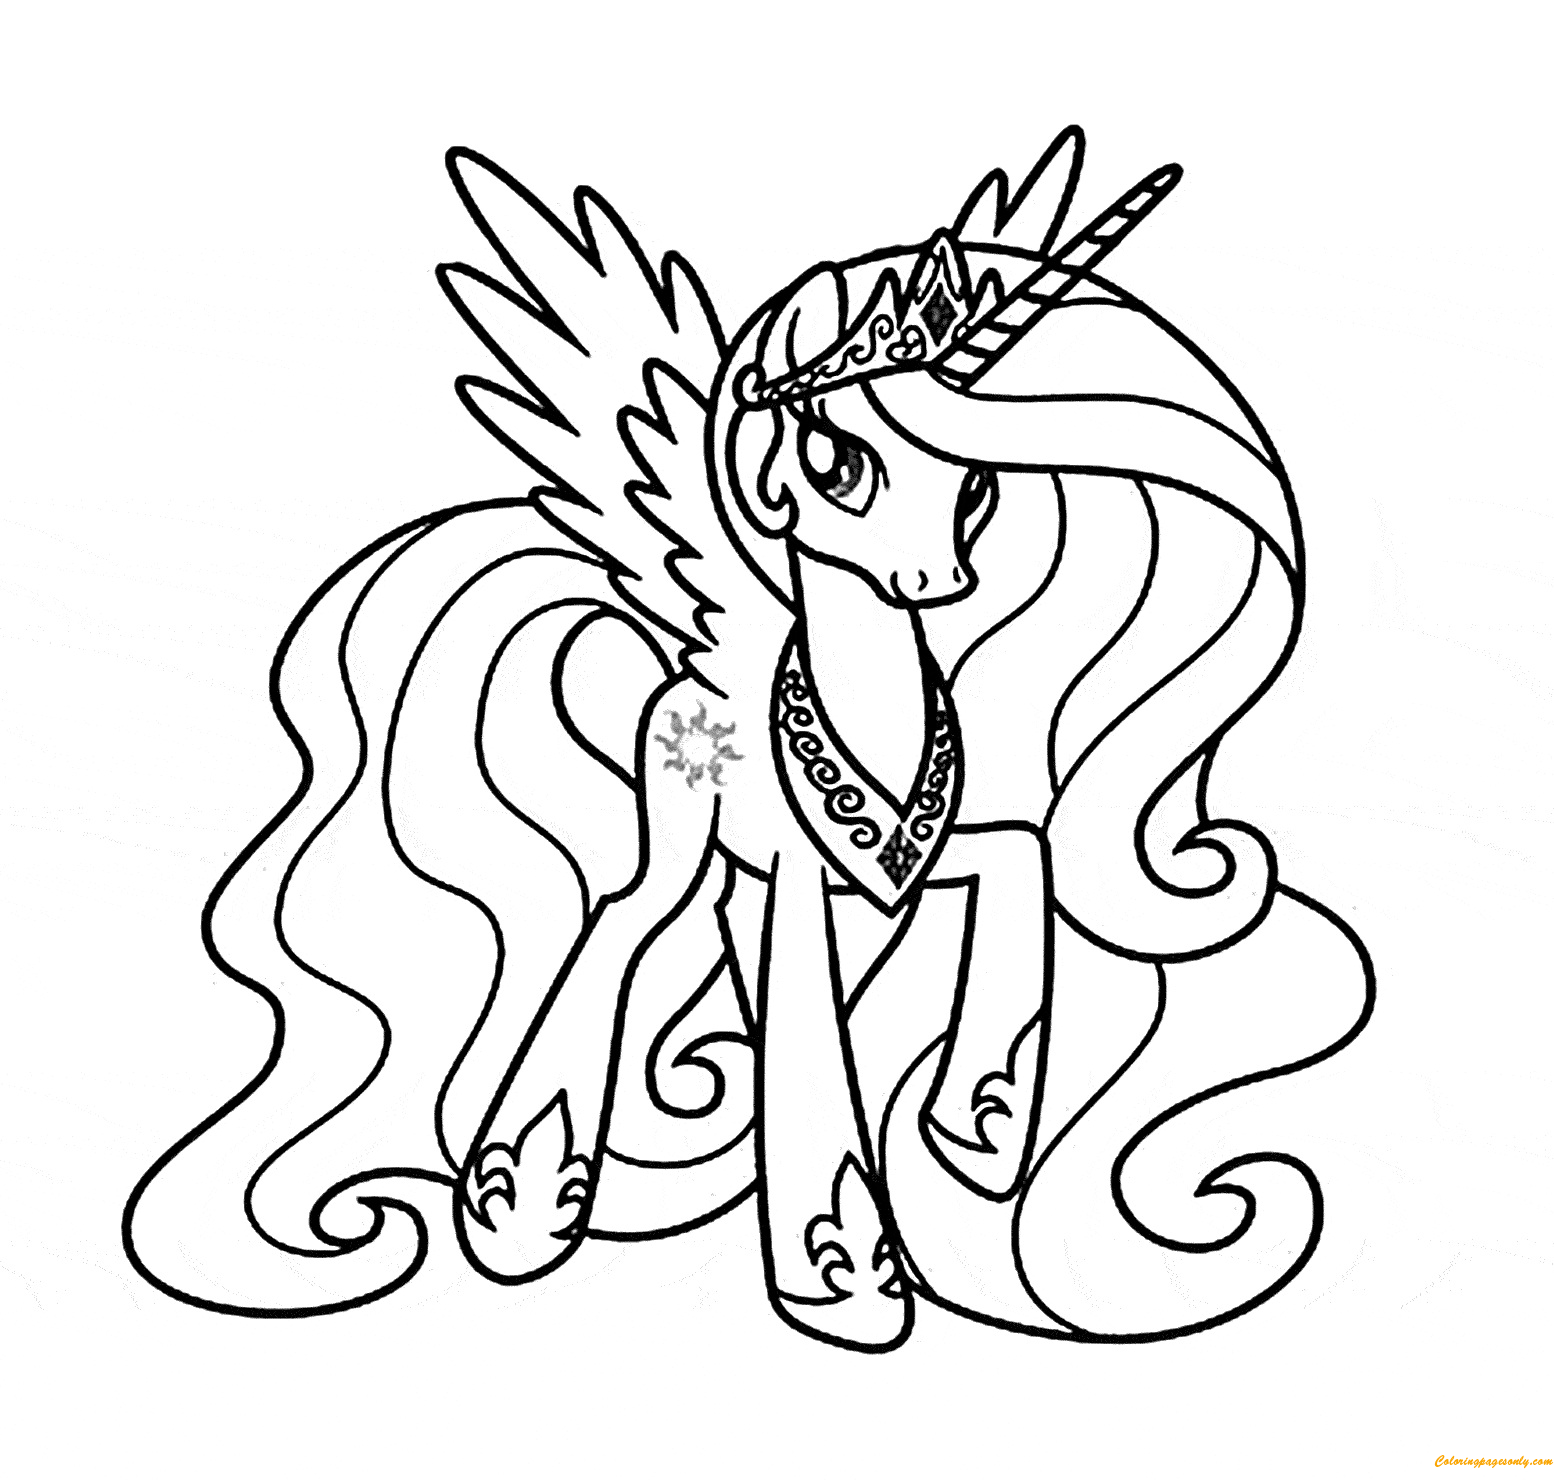 Mlp coloring pages printable for free download